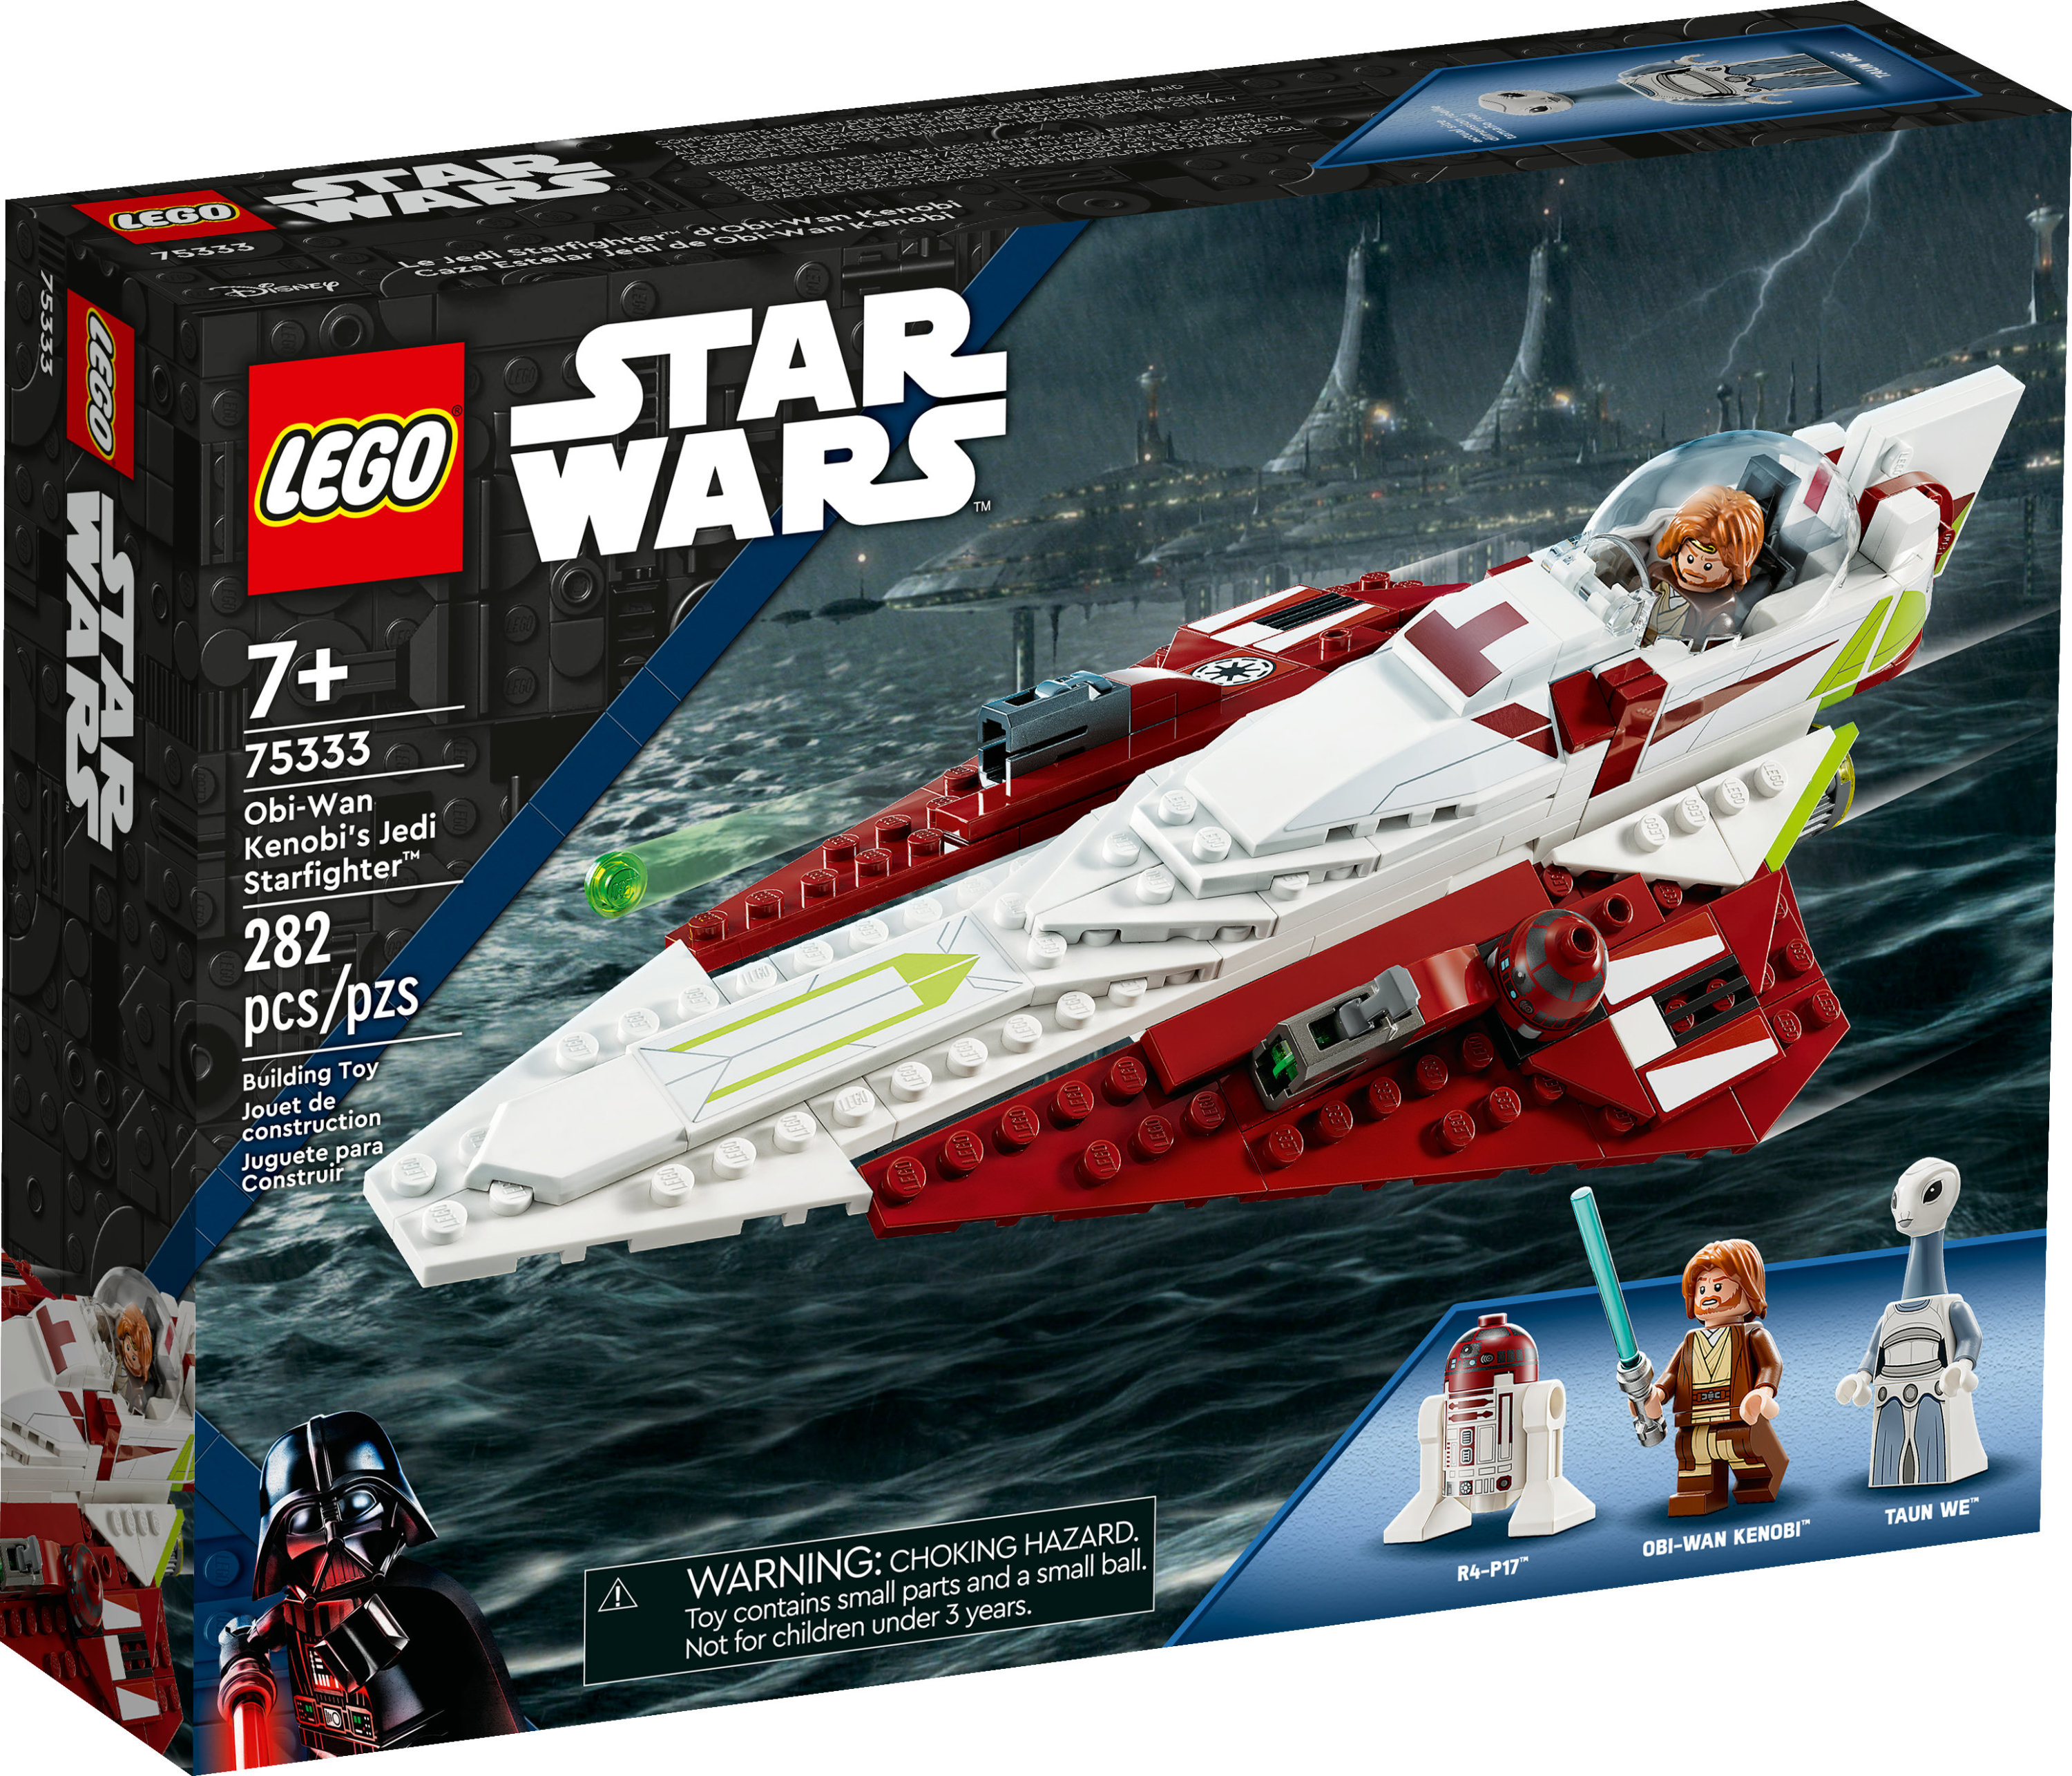 LEGO Star Wars Obi-Wan Kenobi’s Jedi Starfighter 75333, Attack of the Clones Building Set with Taun We Minifigure, Droid Figure and Lightsaber, Gift Idea for Grandchildren or Star Wars Fans Ages 7+ - image 4 of 9